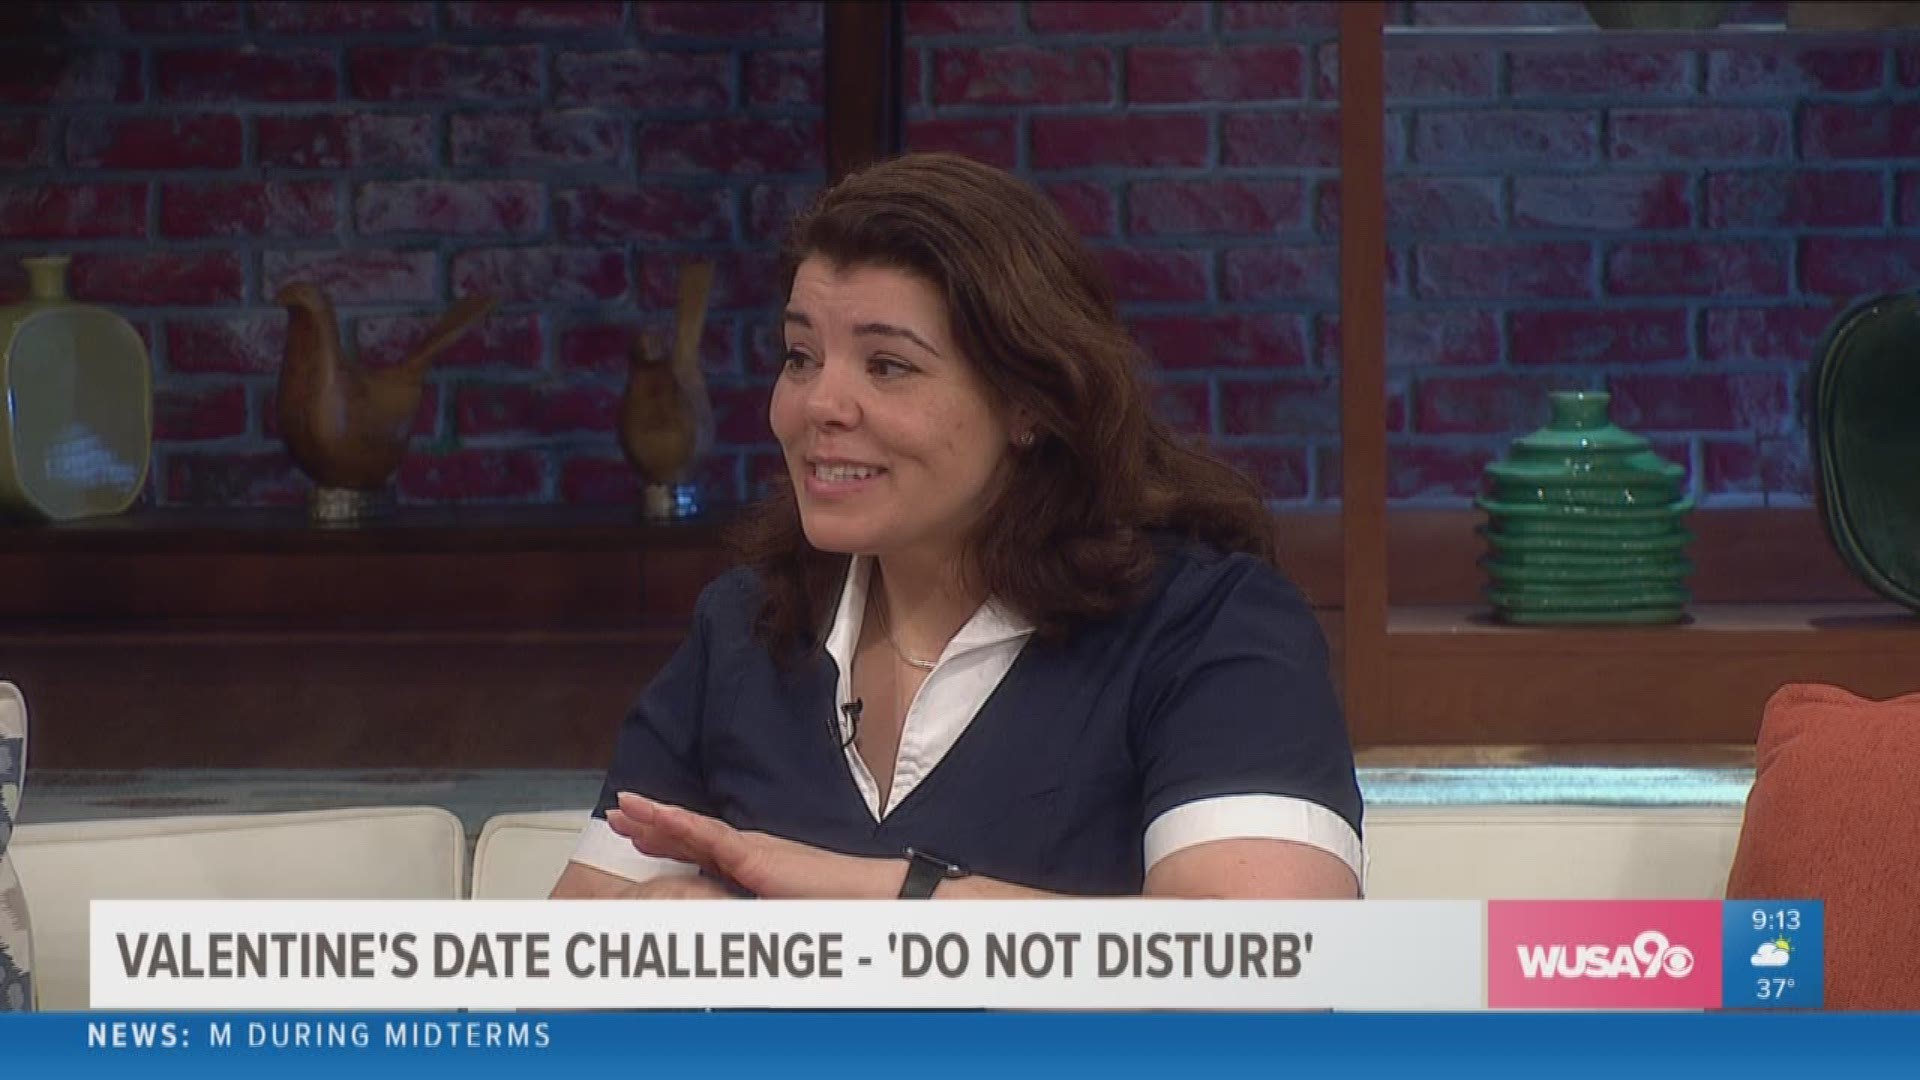 Conversation and communication expert Celeste Headlee, challenges viewers to a “Do Not Disturb Date Night” by leaving their phones in the car this Valentine’s Day to optimize the time spent out with your partner or friends.